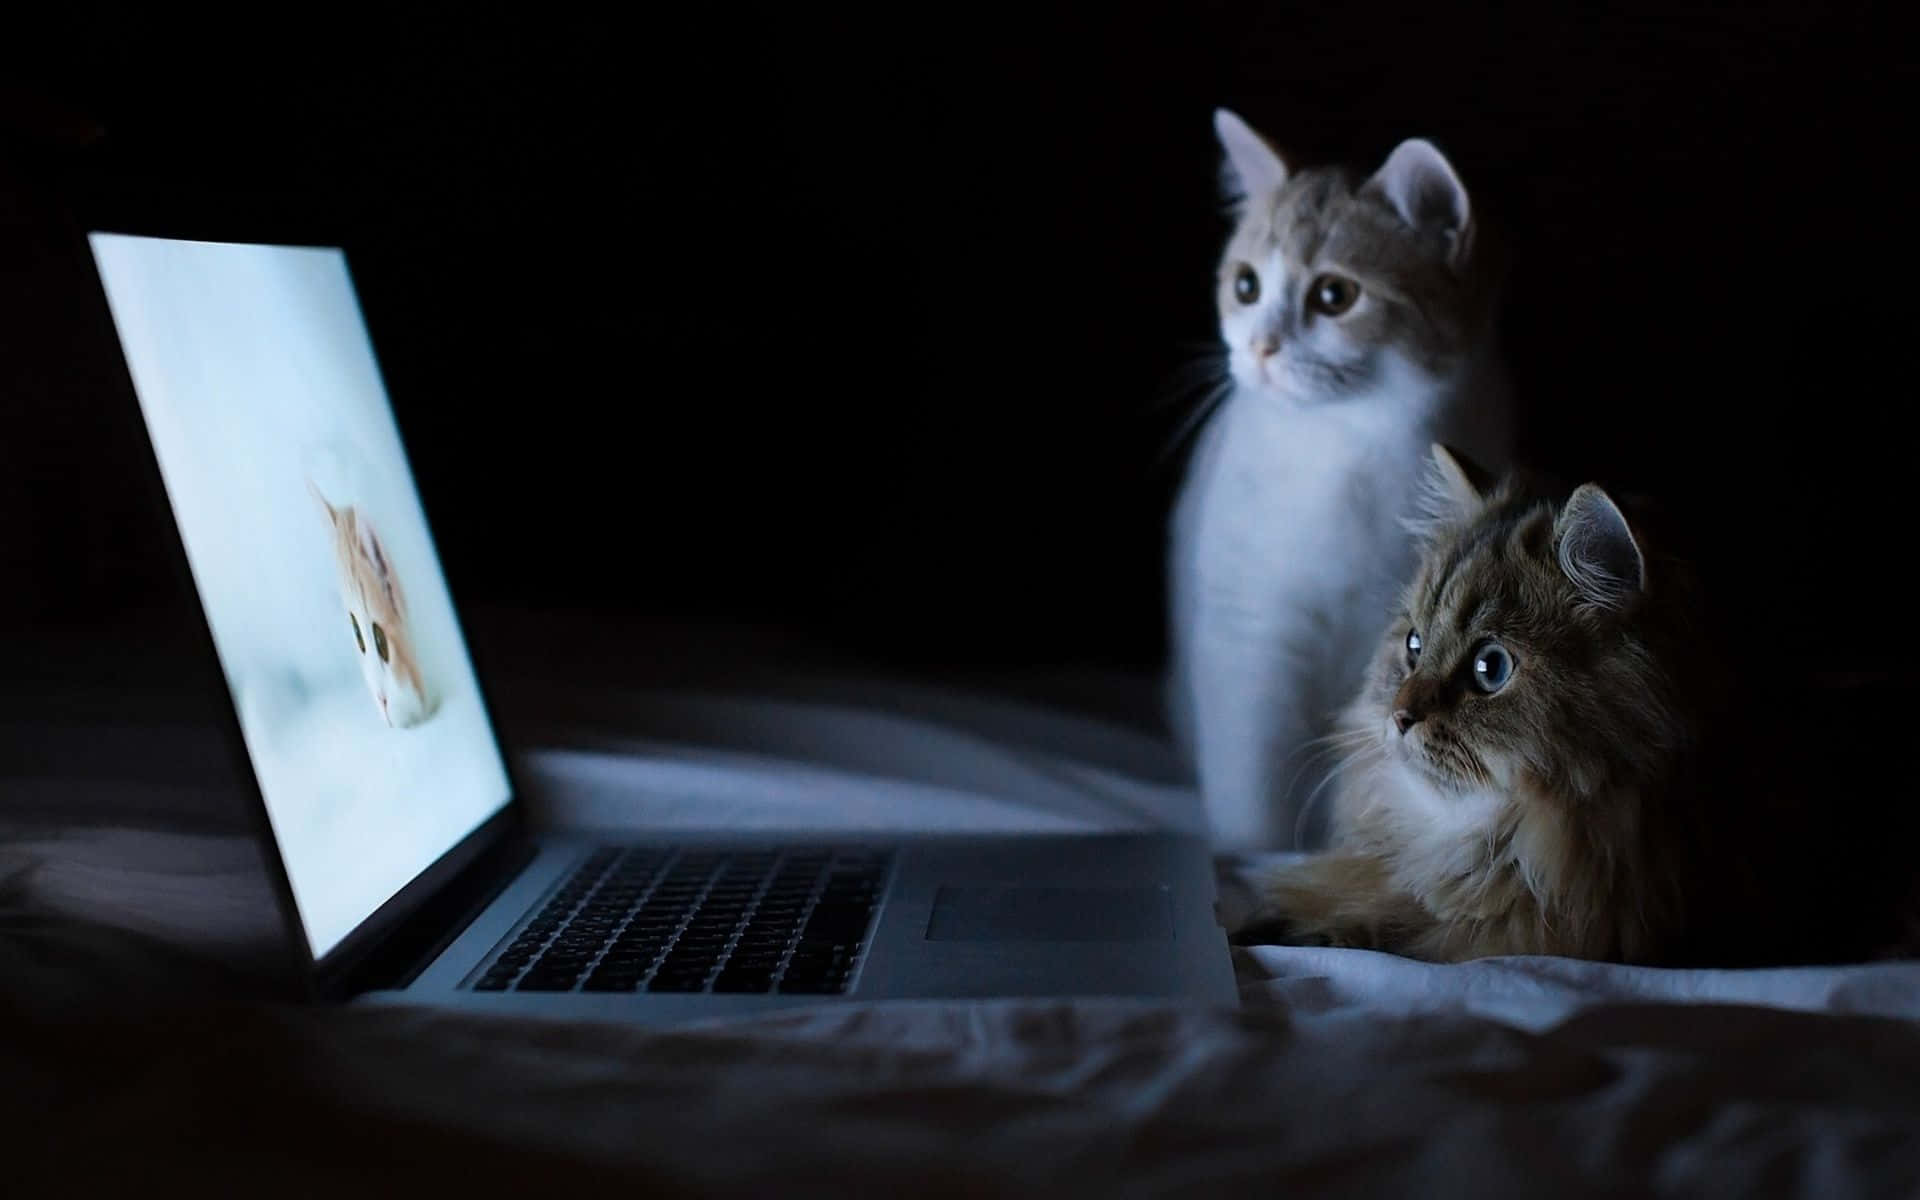 Two Weird Cat Watching Laptop Picture